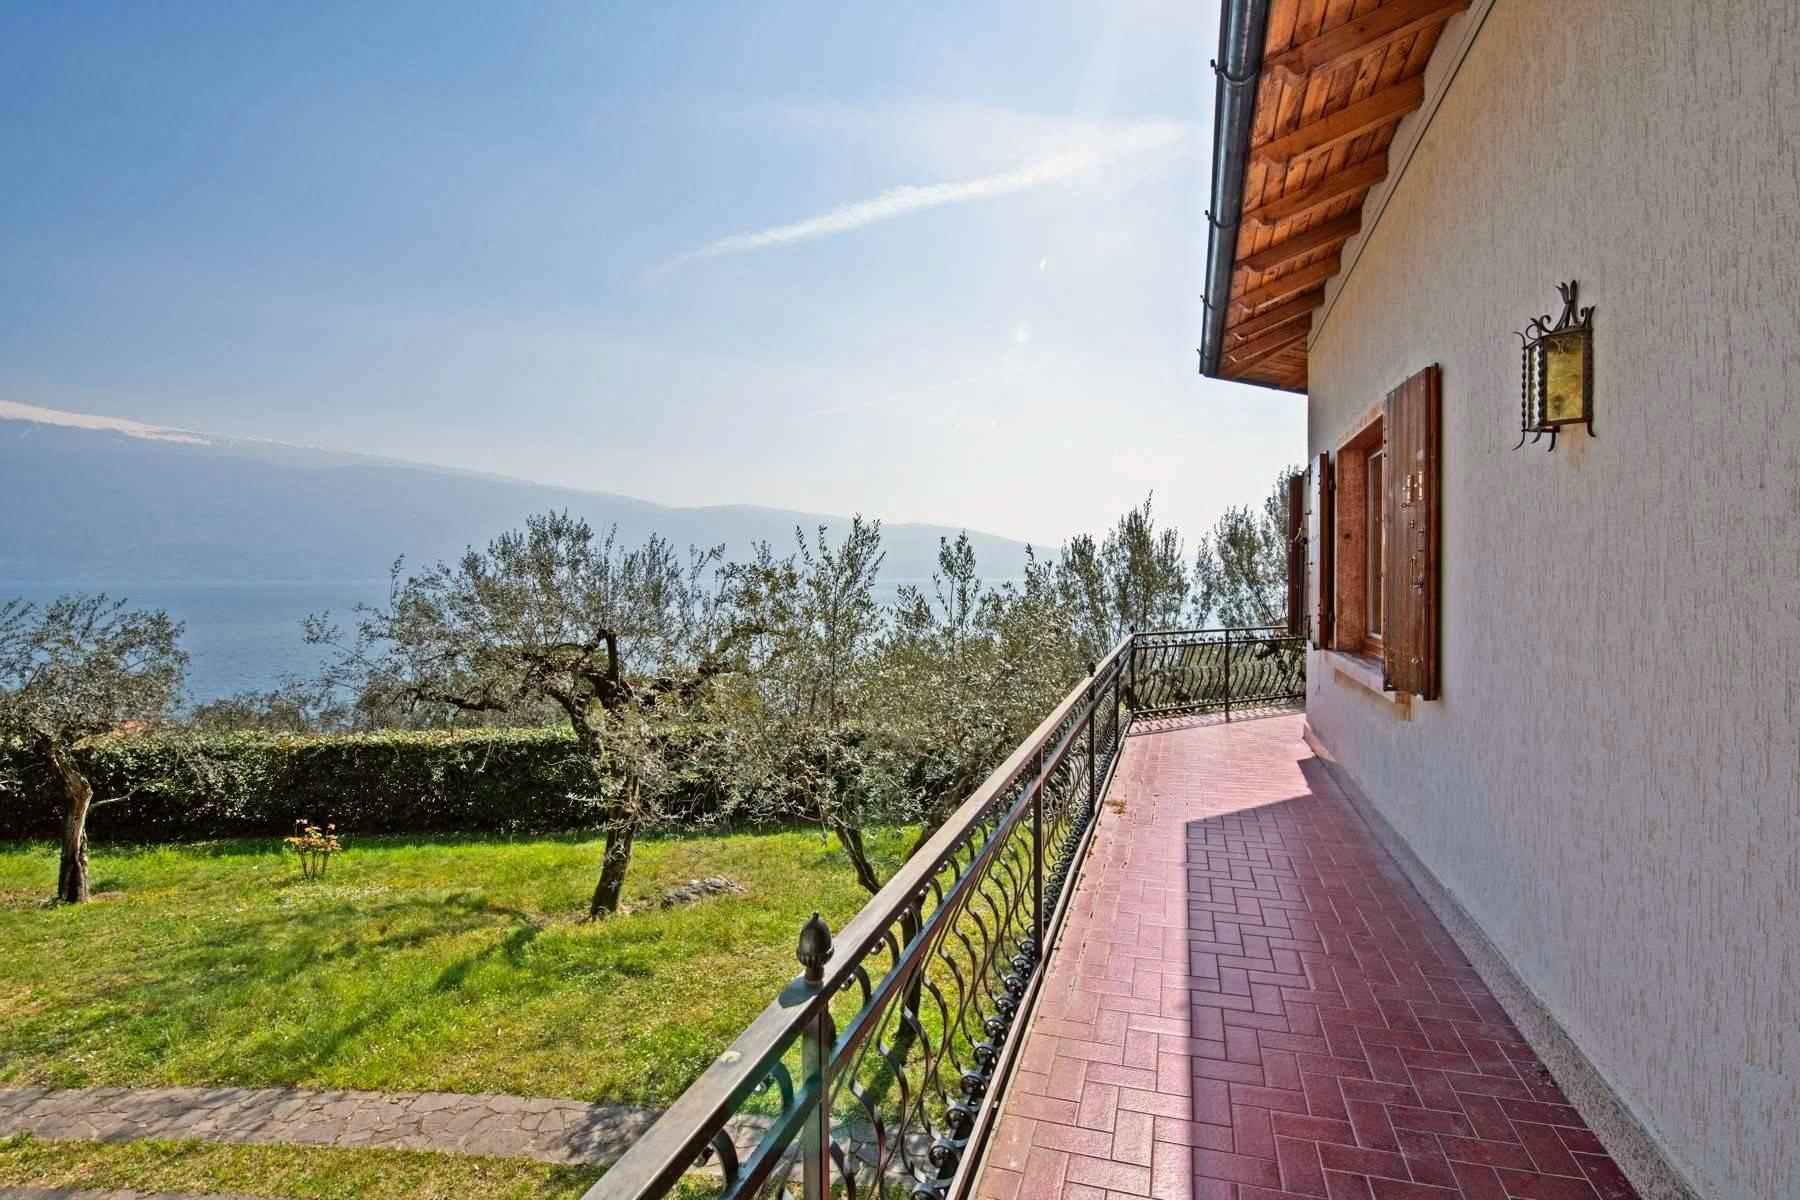 Villa with lake view in Gargnano surrounded by olive trees - 3